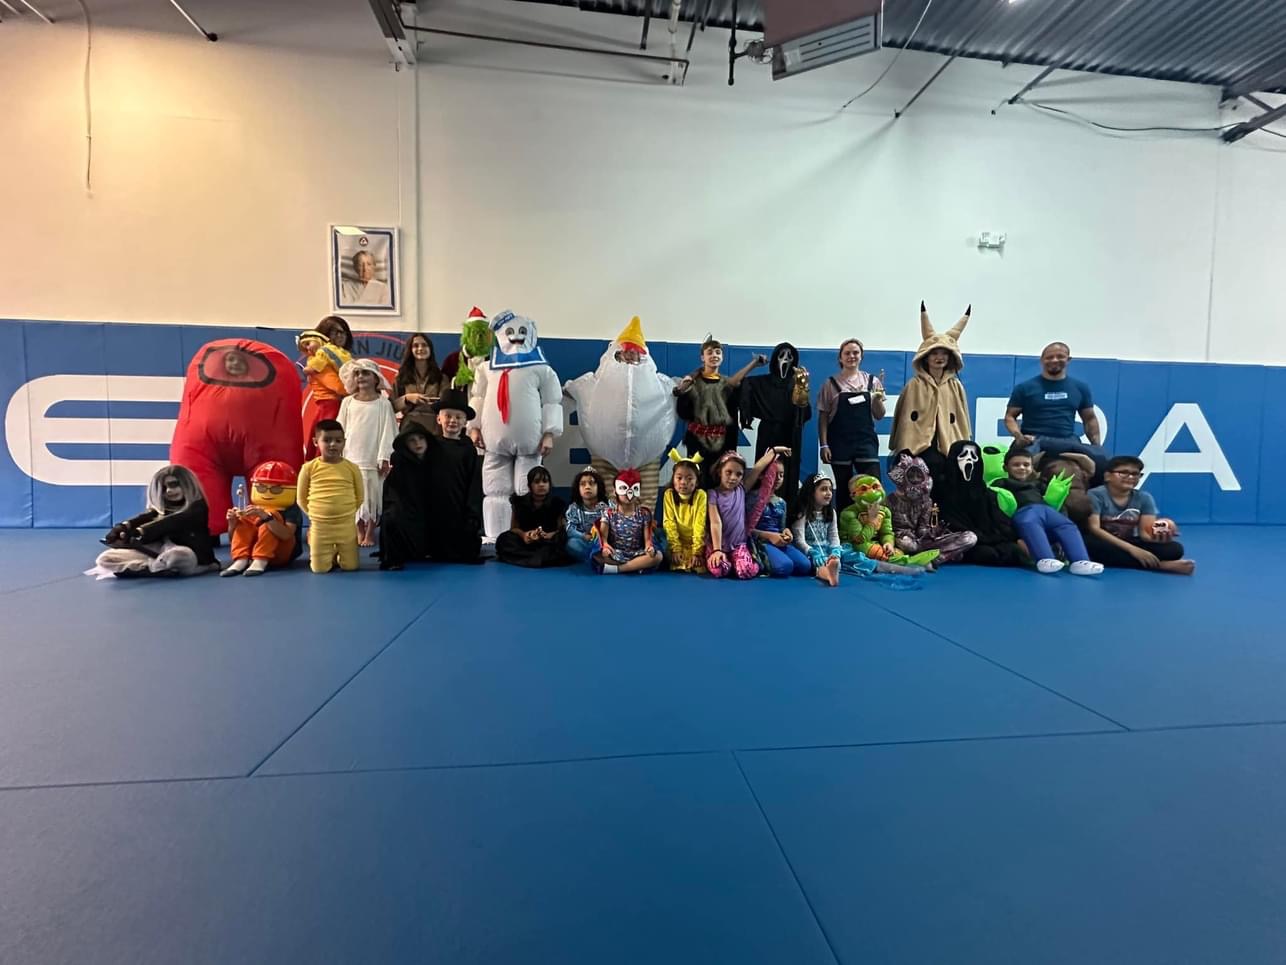 Spooktacular Success: Gracie Barra Chantilly’s Halloween Party Delights Kids and Fosters Positivity